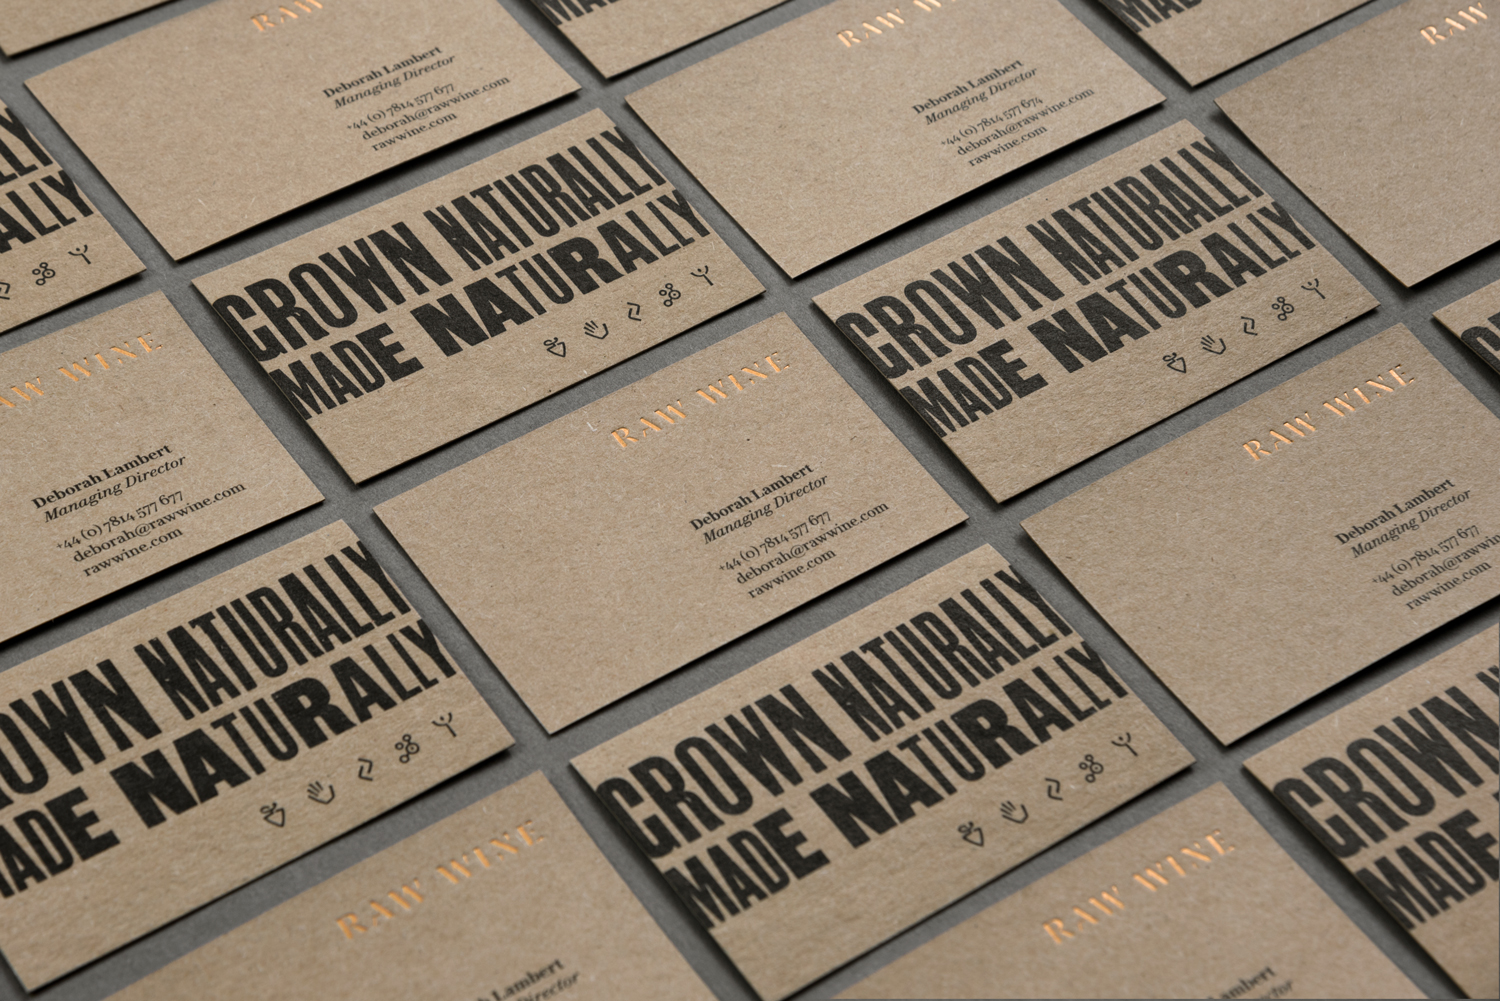 The Best Business Cards Designs of 2017 – Raw Wine by The Counter Press, United Kingdom